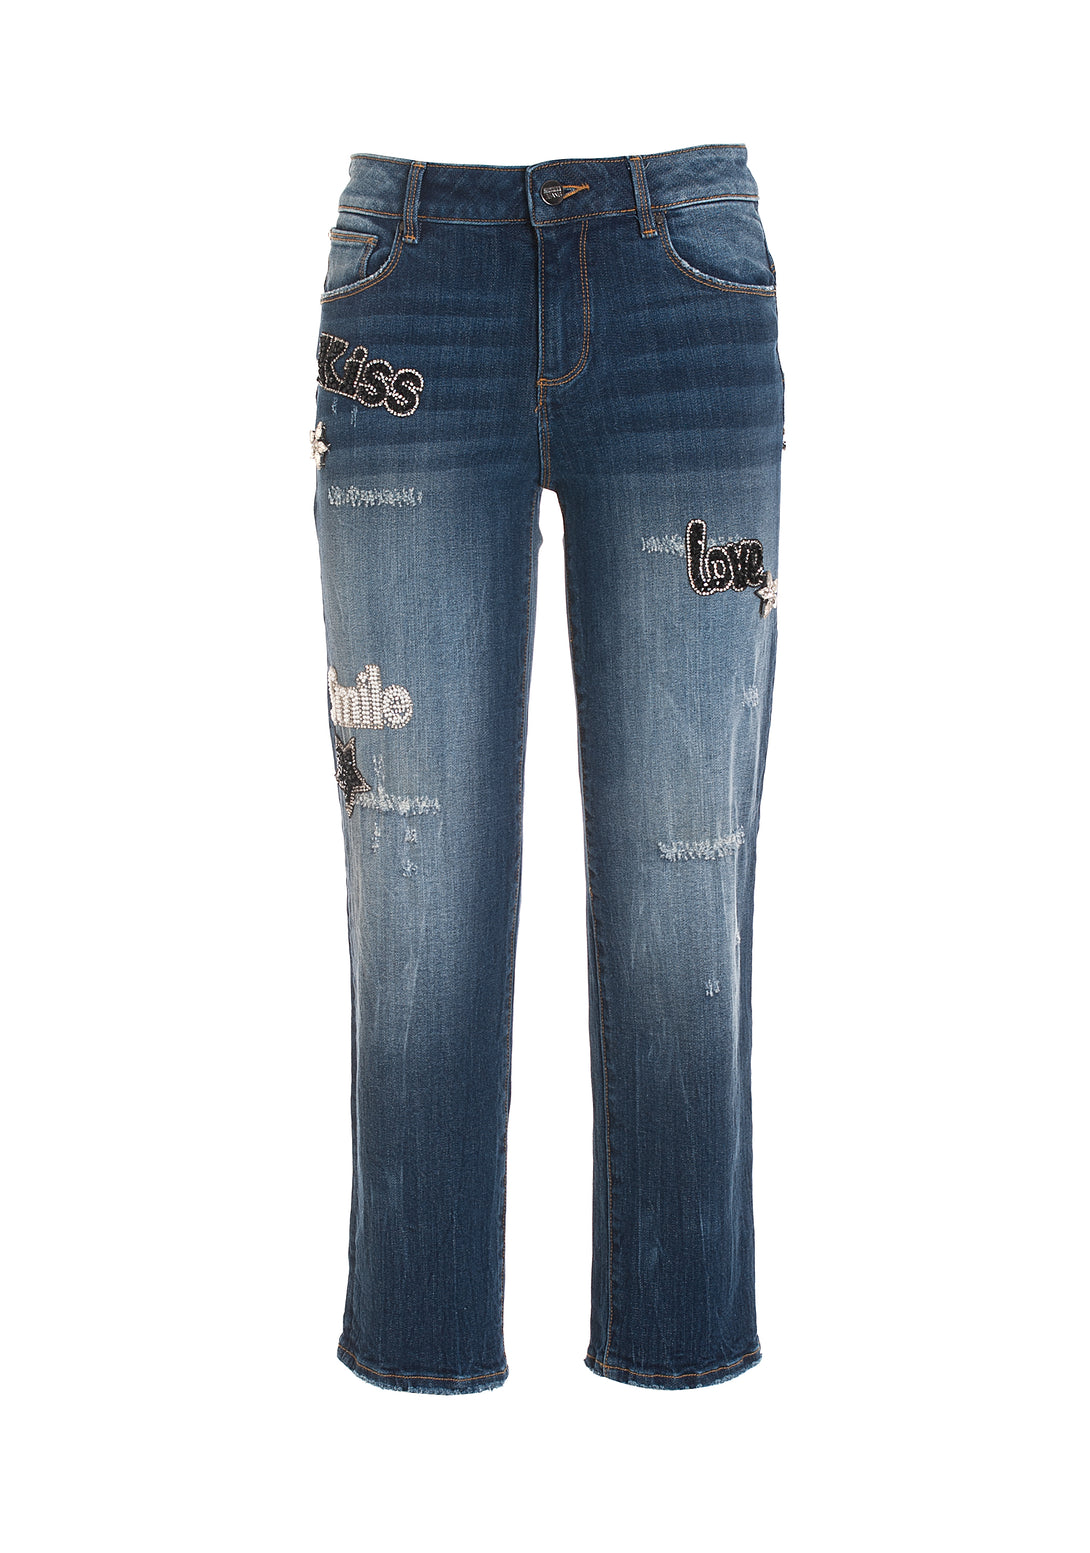 Jeans cropped effetto shape up in denim nero con lavaggio strong-FRACOMINA-FP22WV8031D420G5-430-JN-24